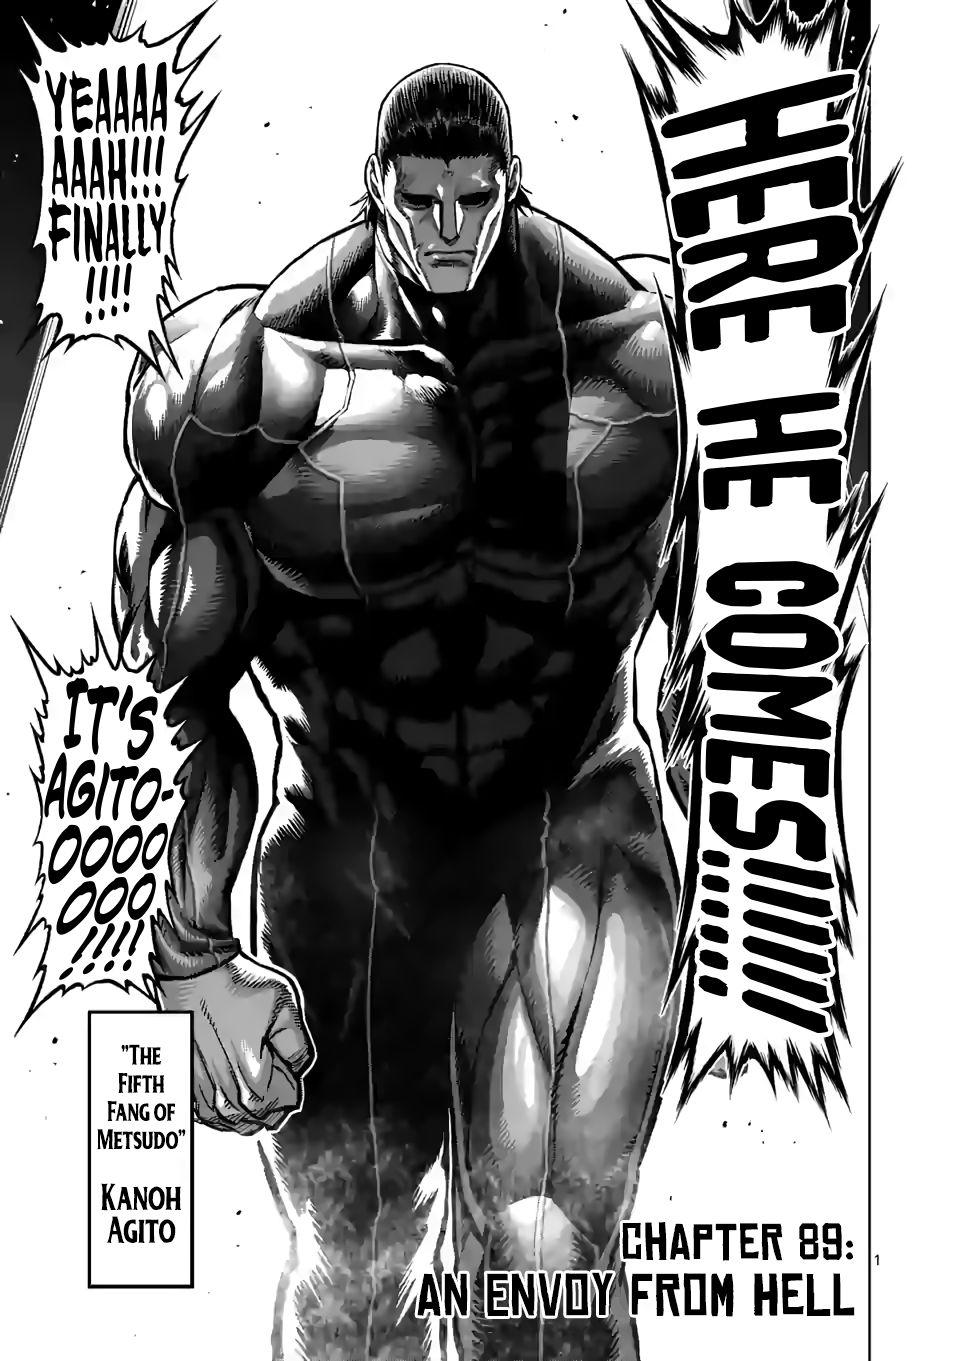 kengan Omega, Chapter 89 : An Envoy From Hell